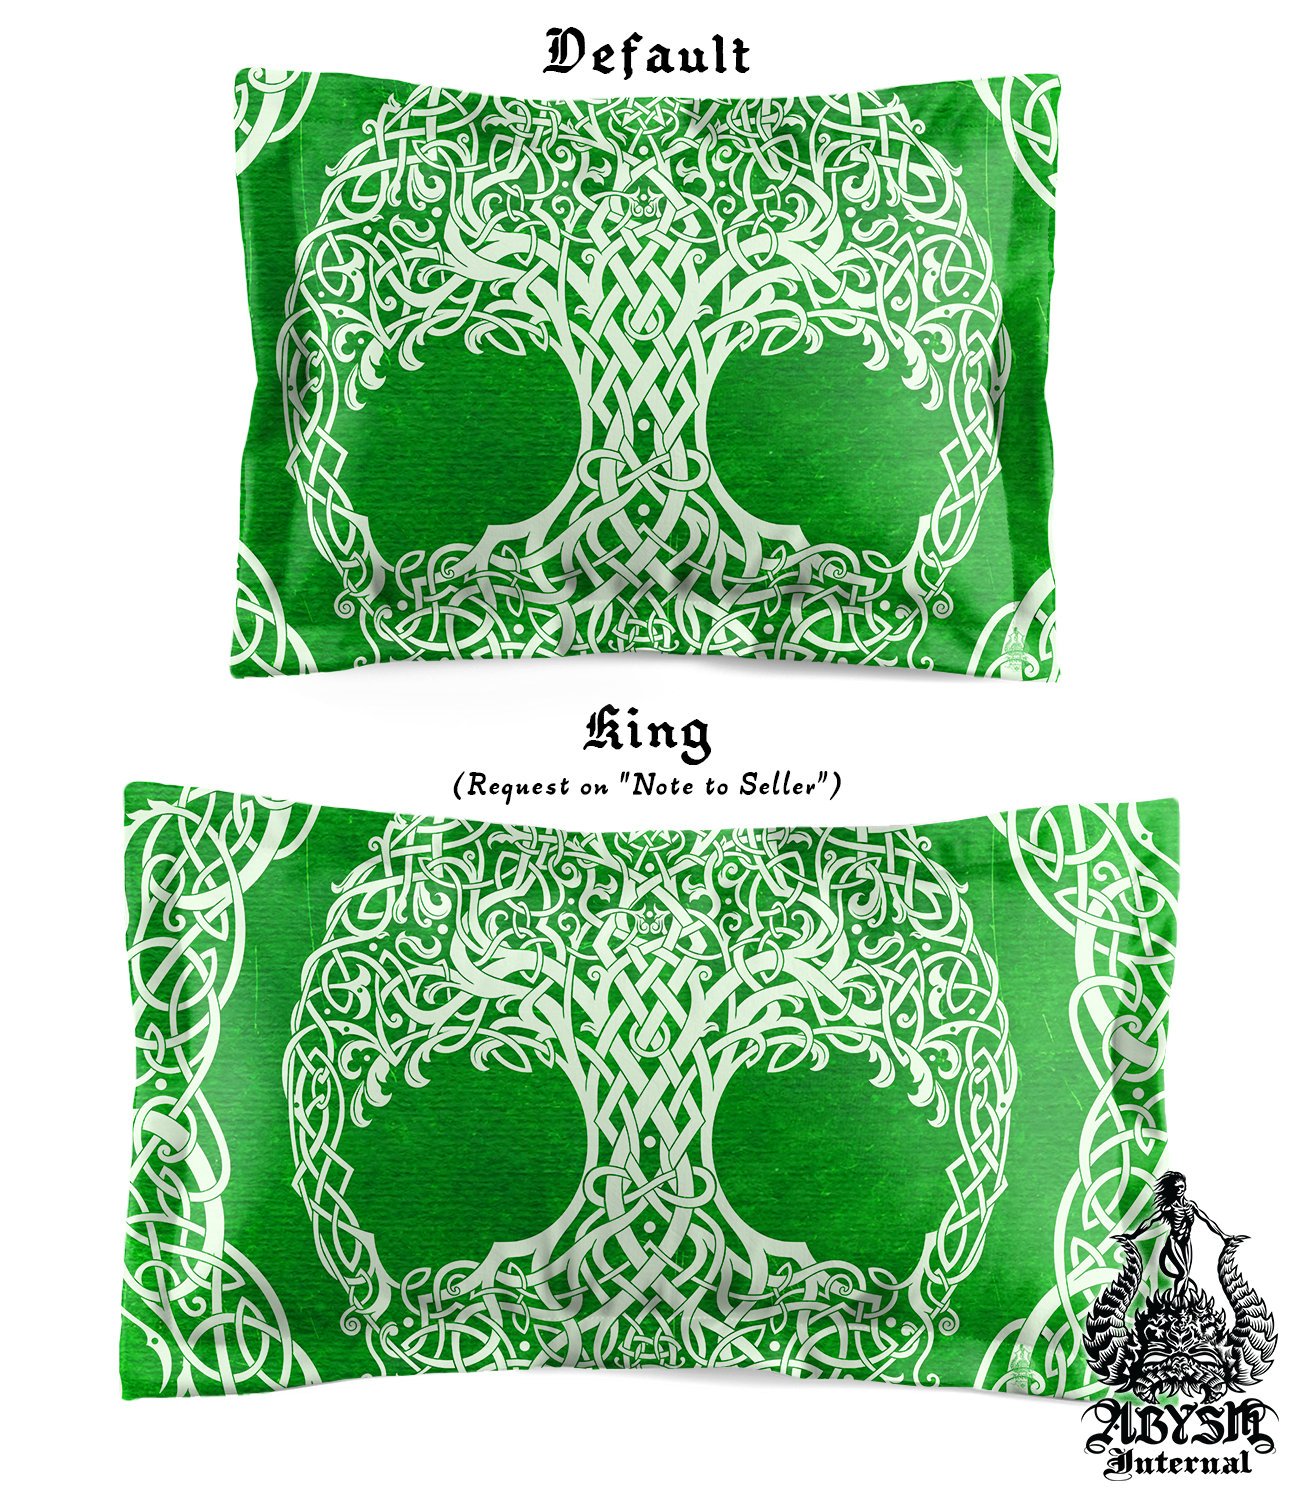 Tree of Life Bedding Set, Comforter and Duvet, Indie Bed Cover, Wiccan Bedroom Decor King, Queen and Twin Size - Celtic, Green - Abysm Internal